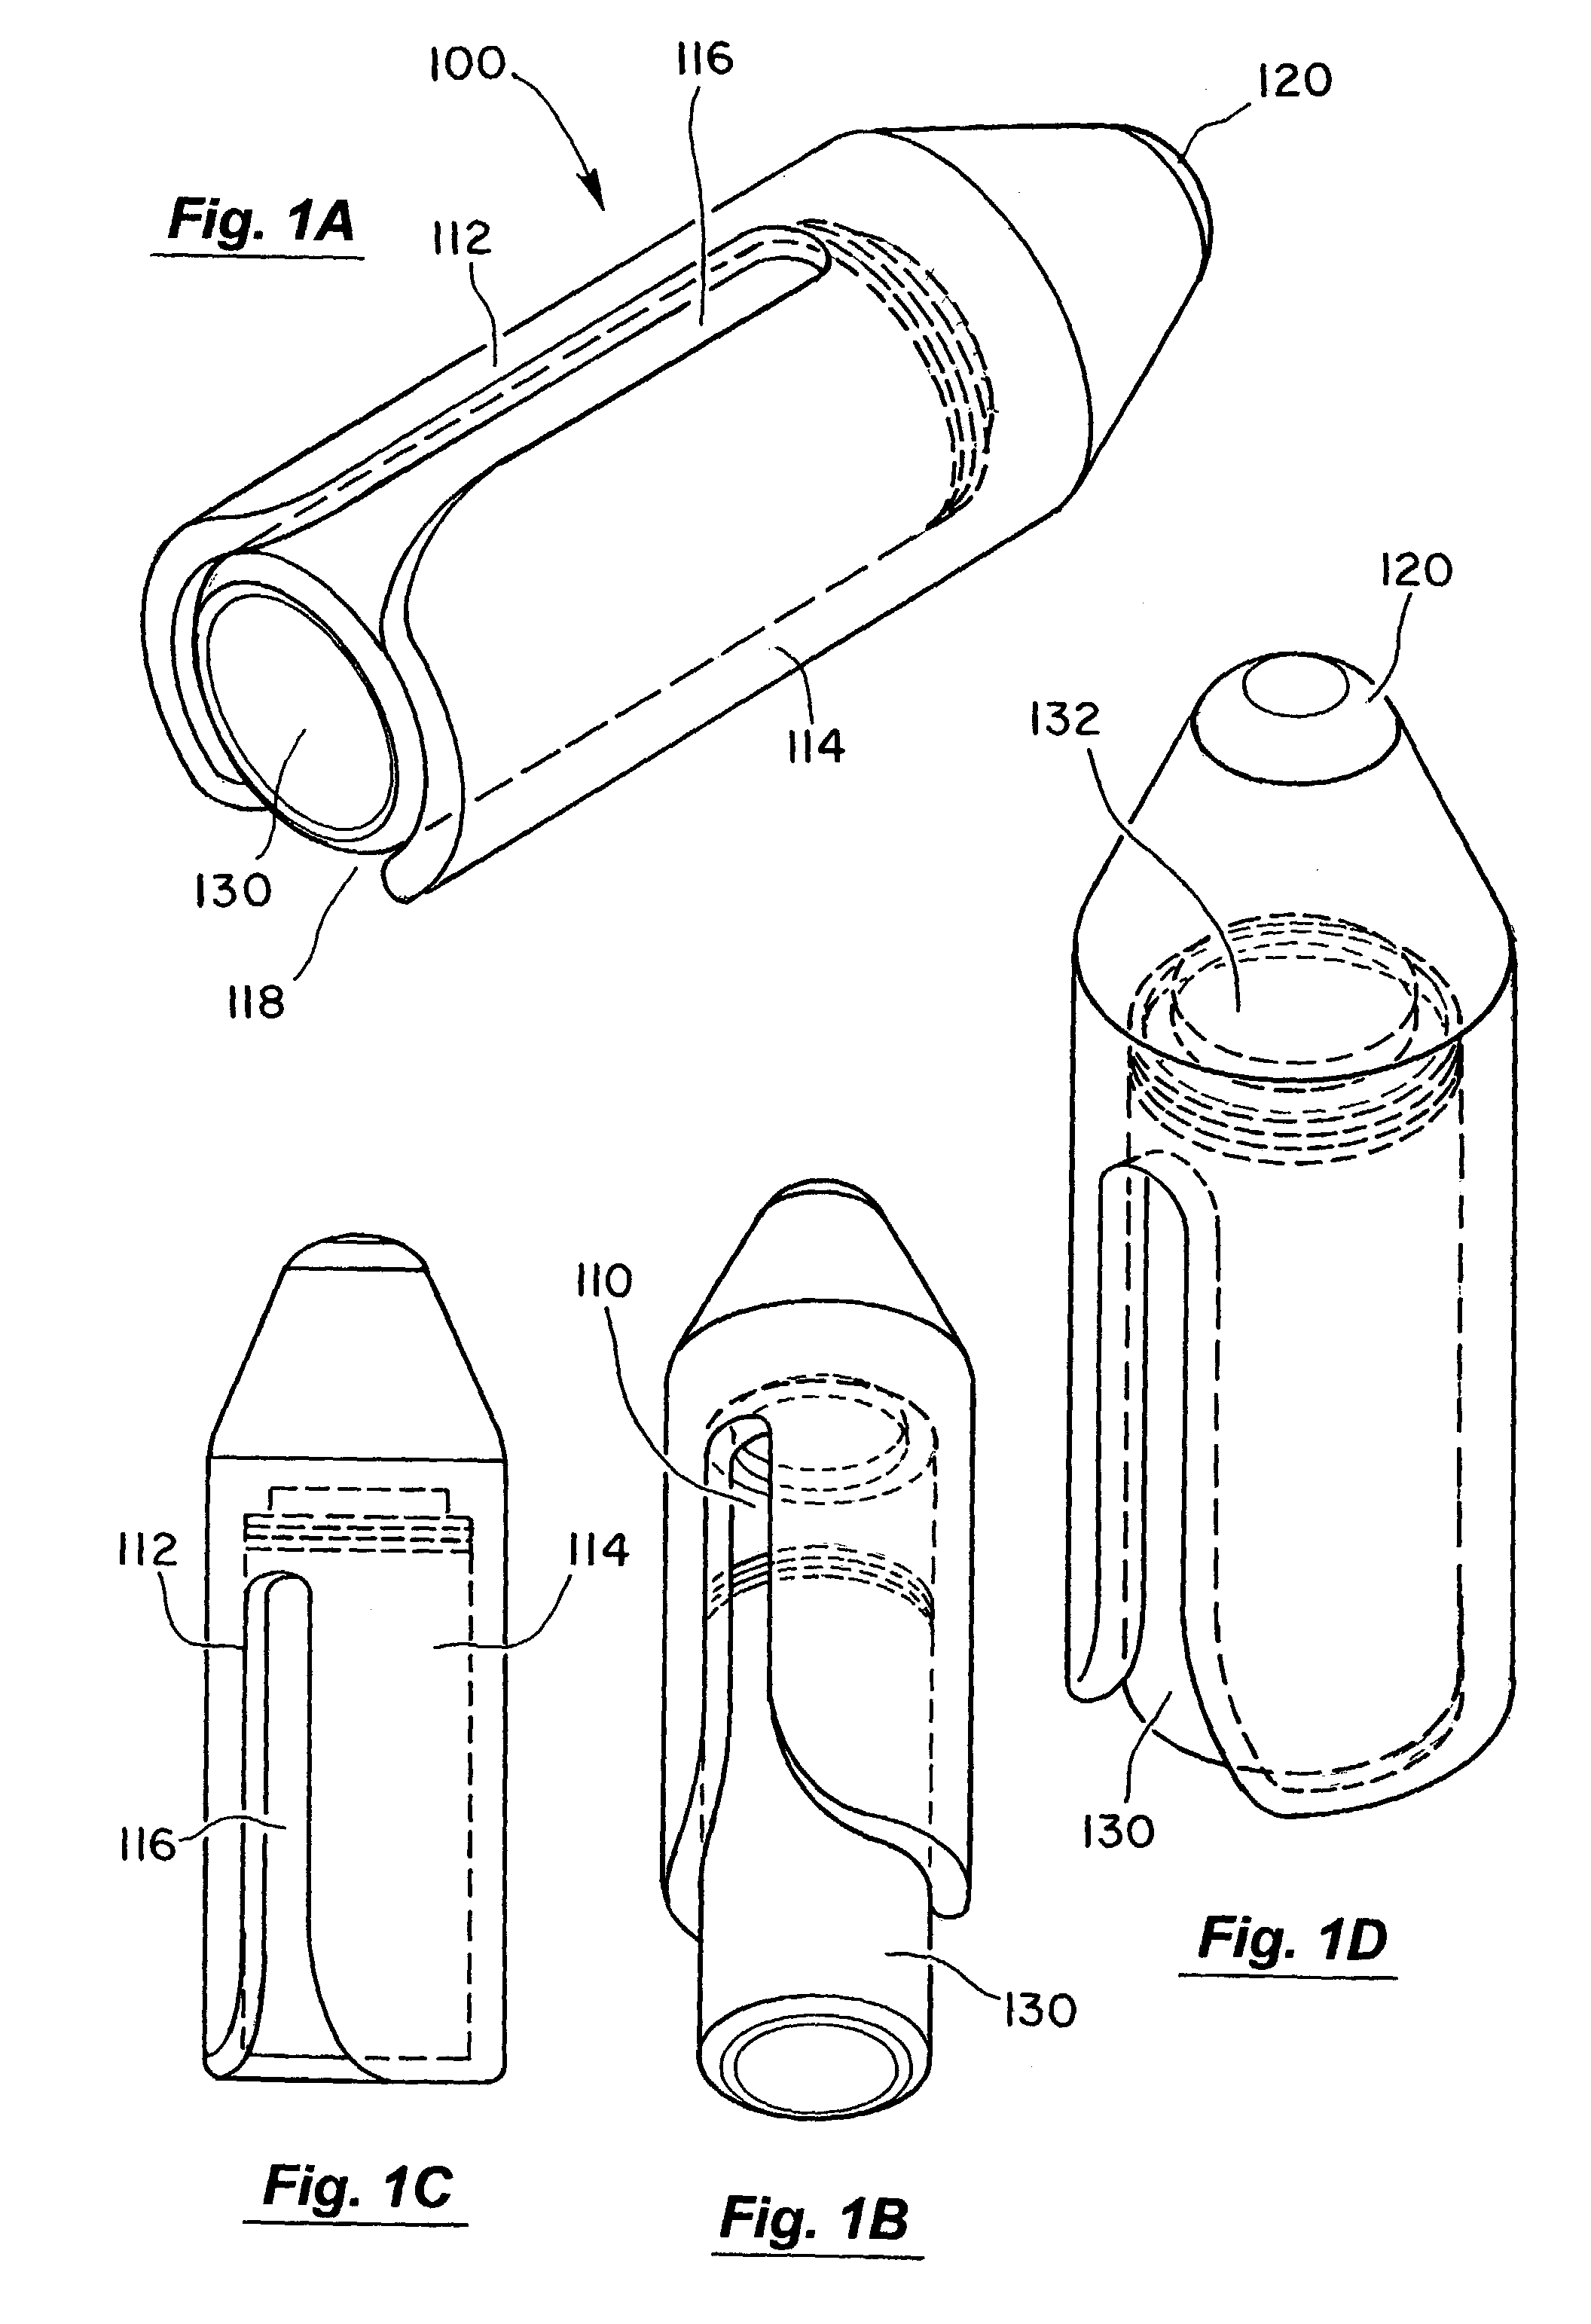 Beverage transporting and dispensing systems and methods